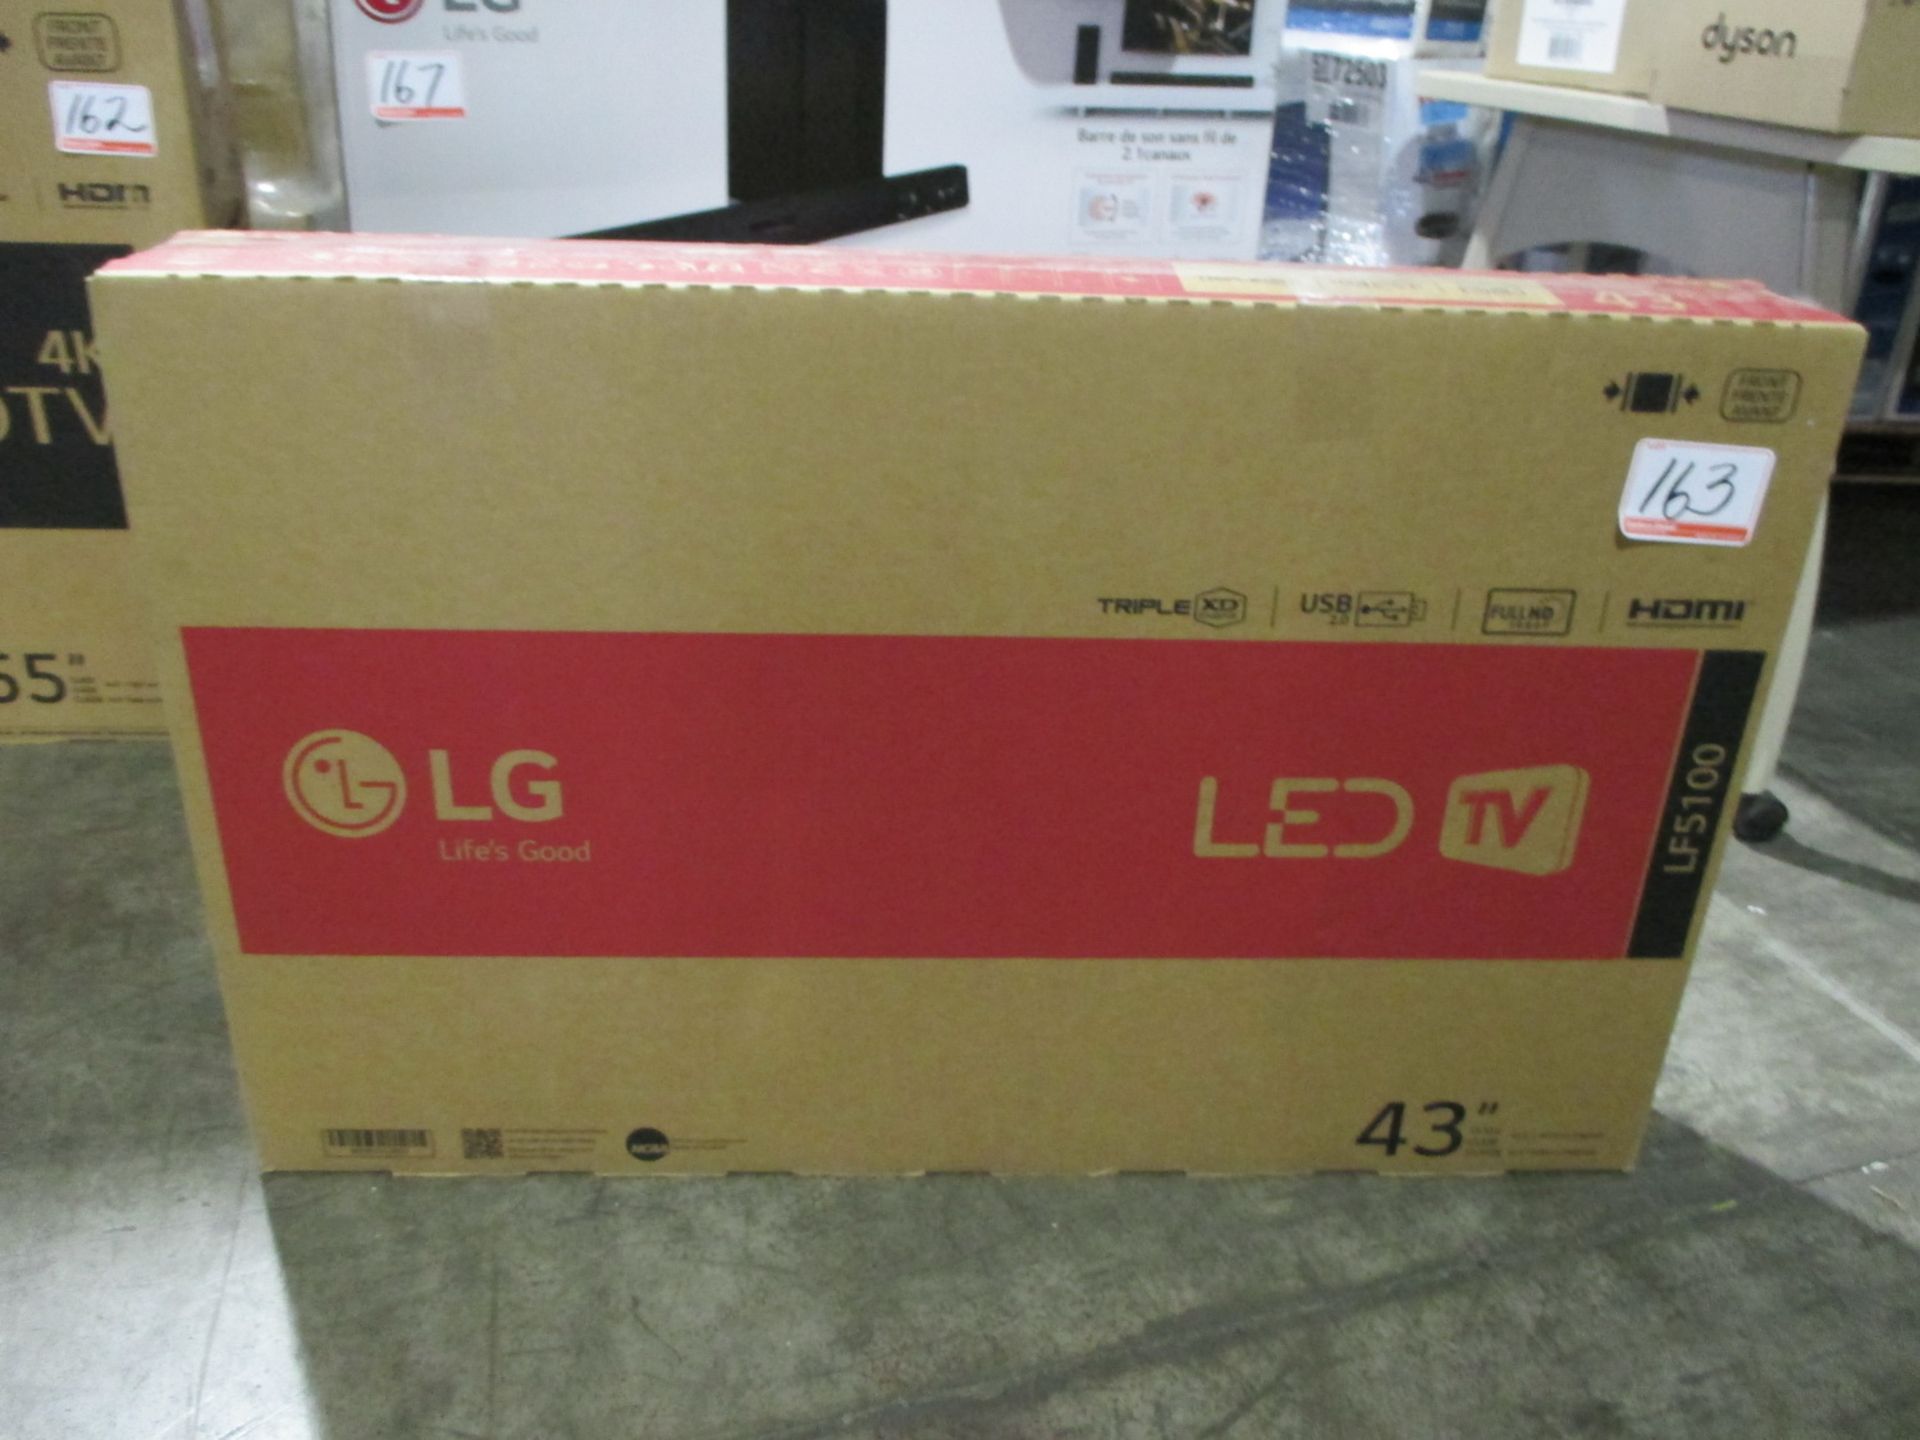 LG LF5100 43" LED TV (3-MONTH WARRANTY FROM DATE OF AUCTION)